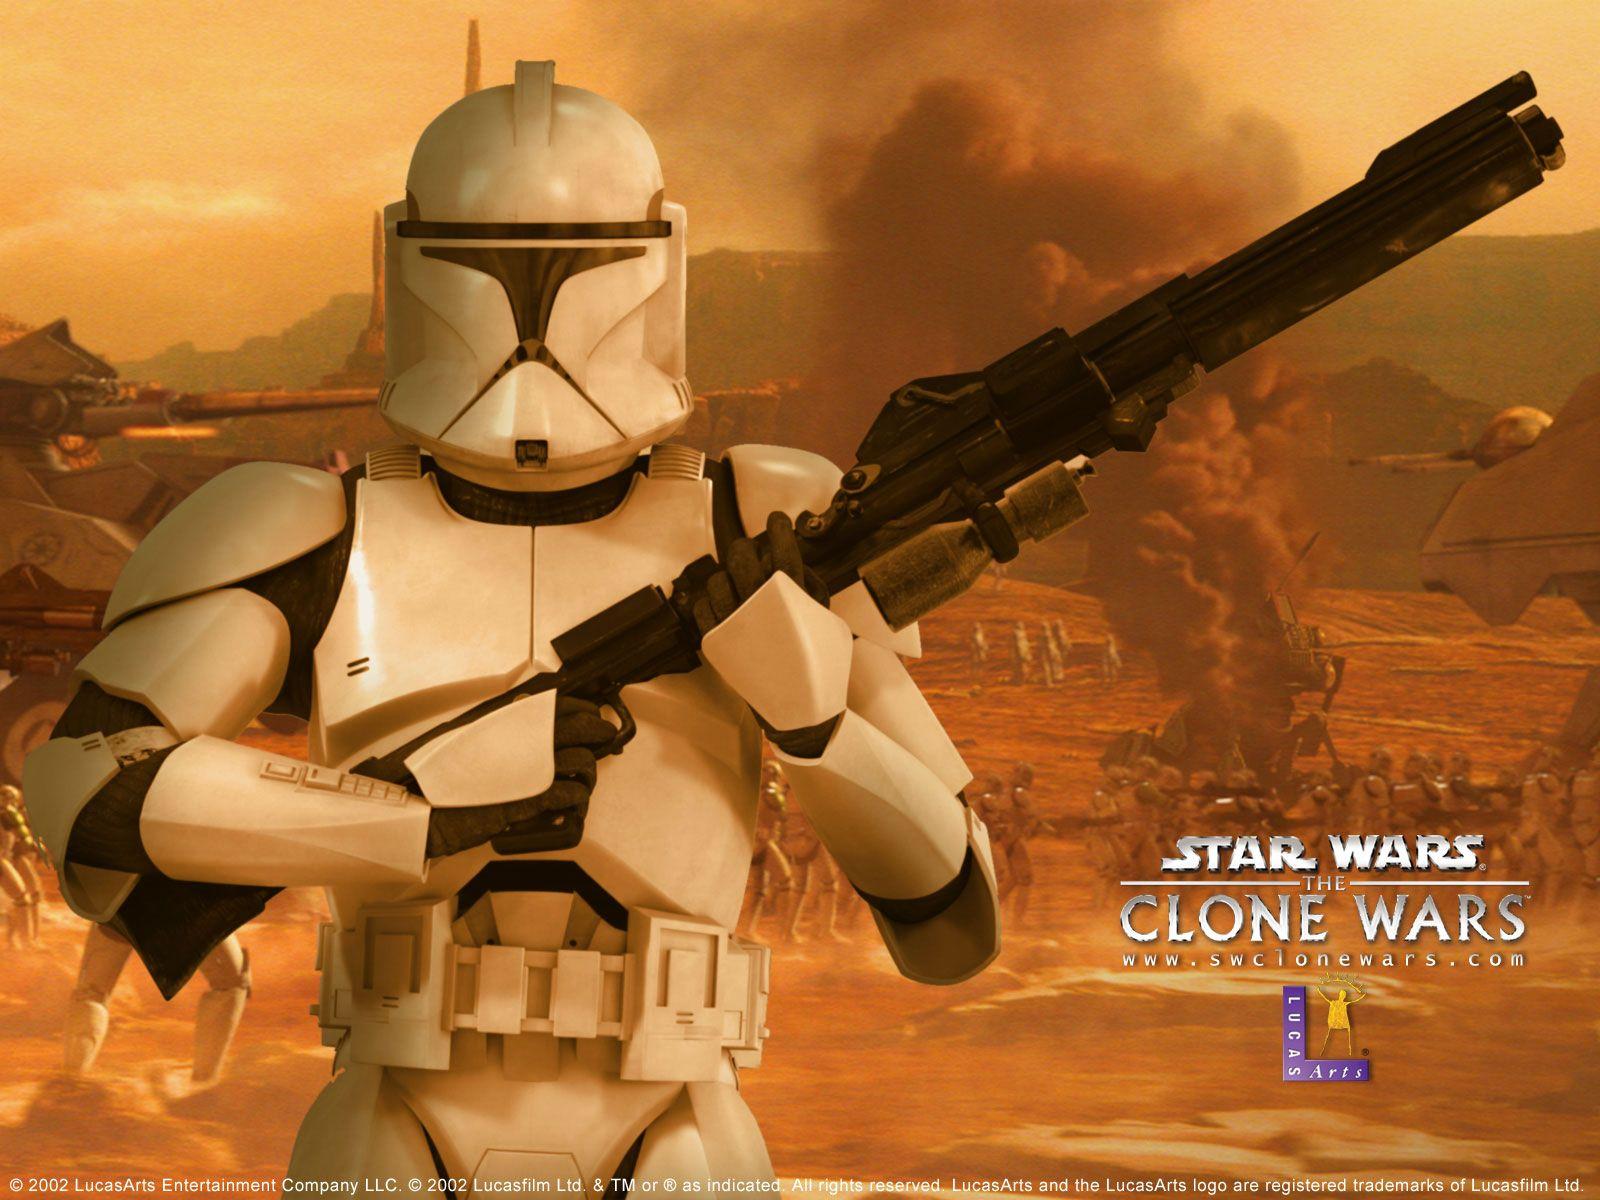 Star Wars: The Clone Wars Wallpaper and Background Imagex1200